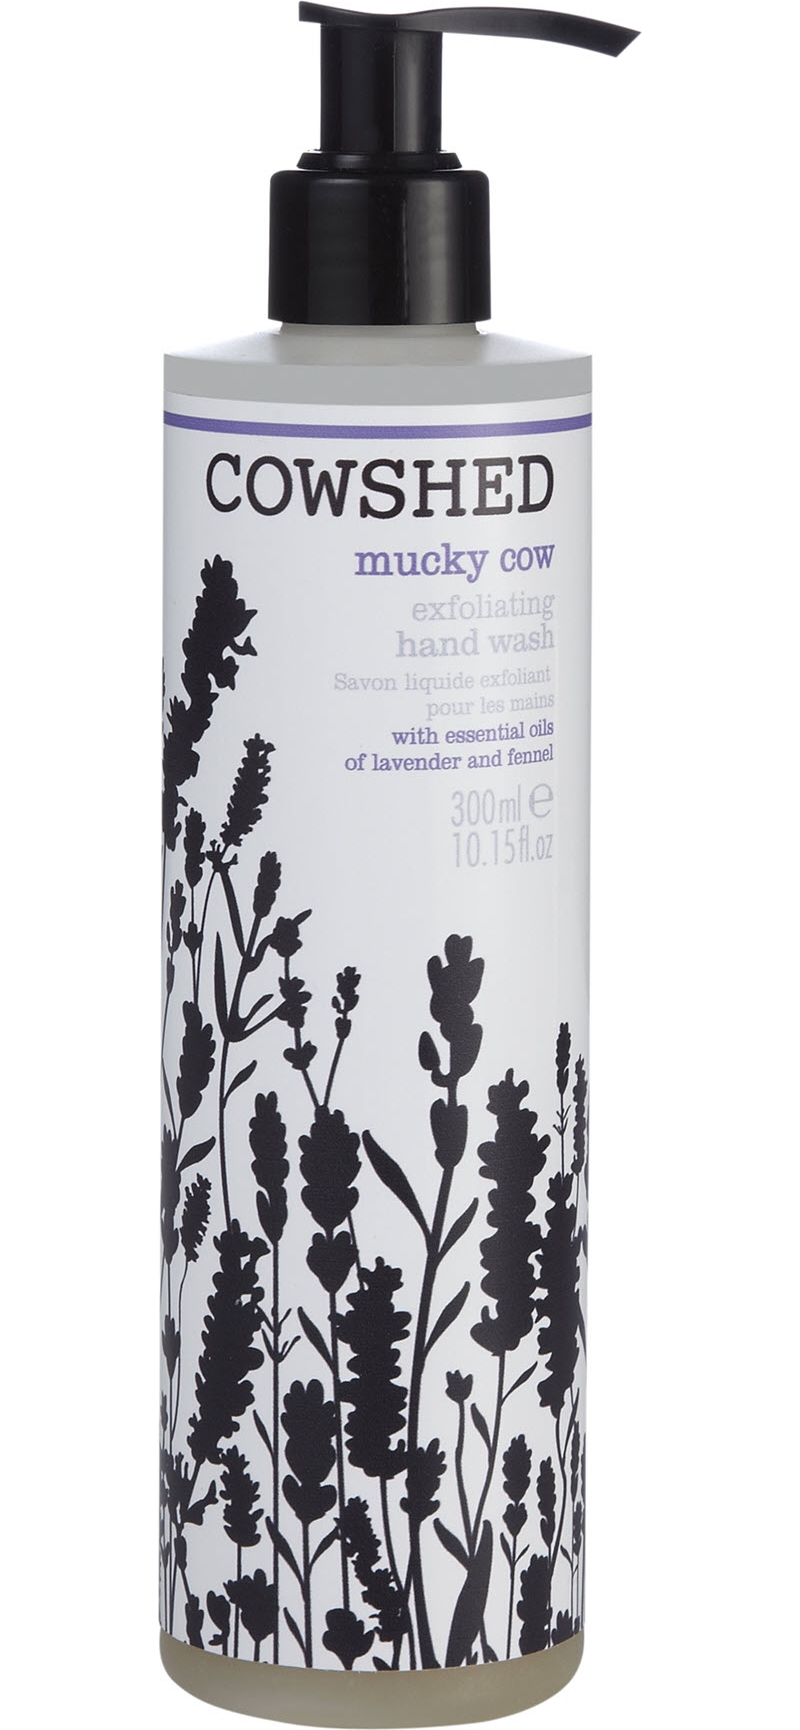 COWSHED   Mucky Cow exfoliating hand wash 300ml